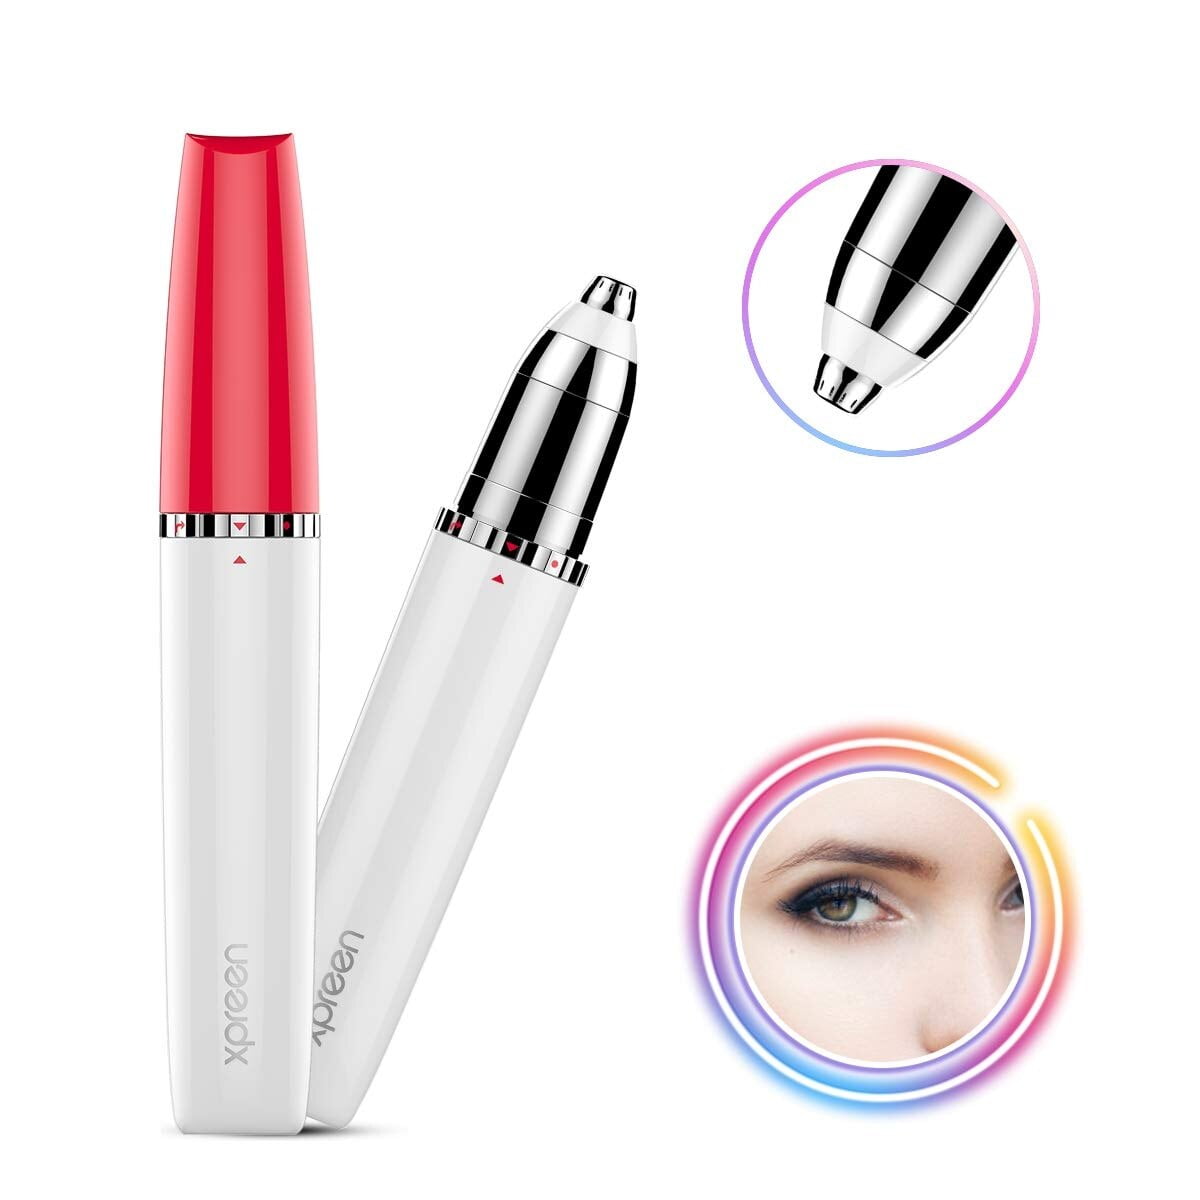 Clearance! 2 in1 New Eyebrow Hair Remover, Portable Painless Precision  Eyebrow Trimmer Razor Tool, Finishing Touch Flawless Brows Eyebrow Hair  Remover, with Built-in LED Light-Remove Pain-Free 